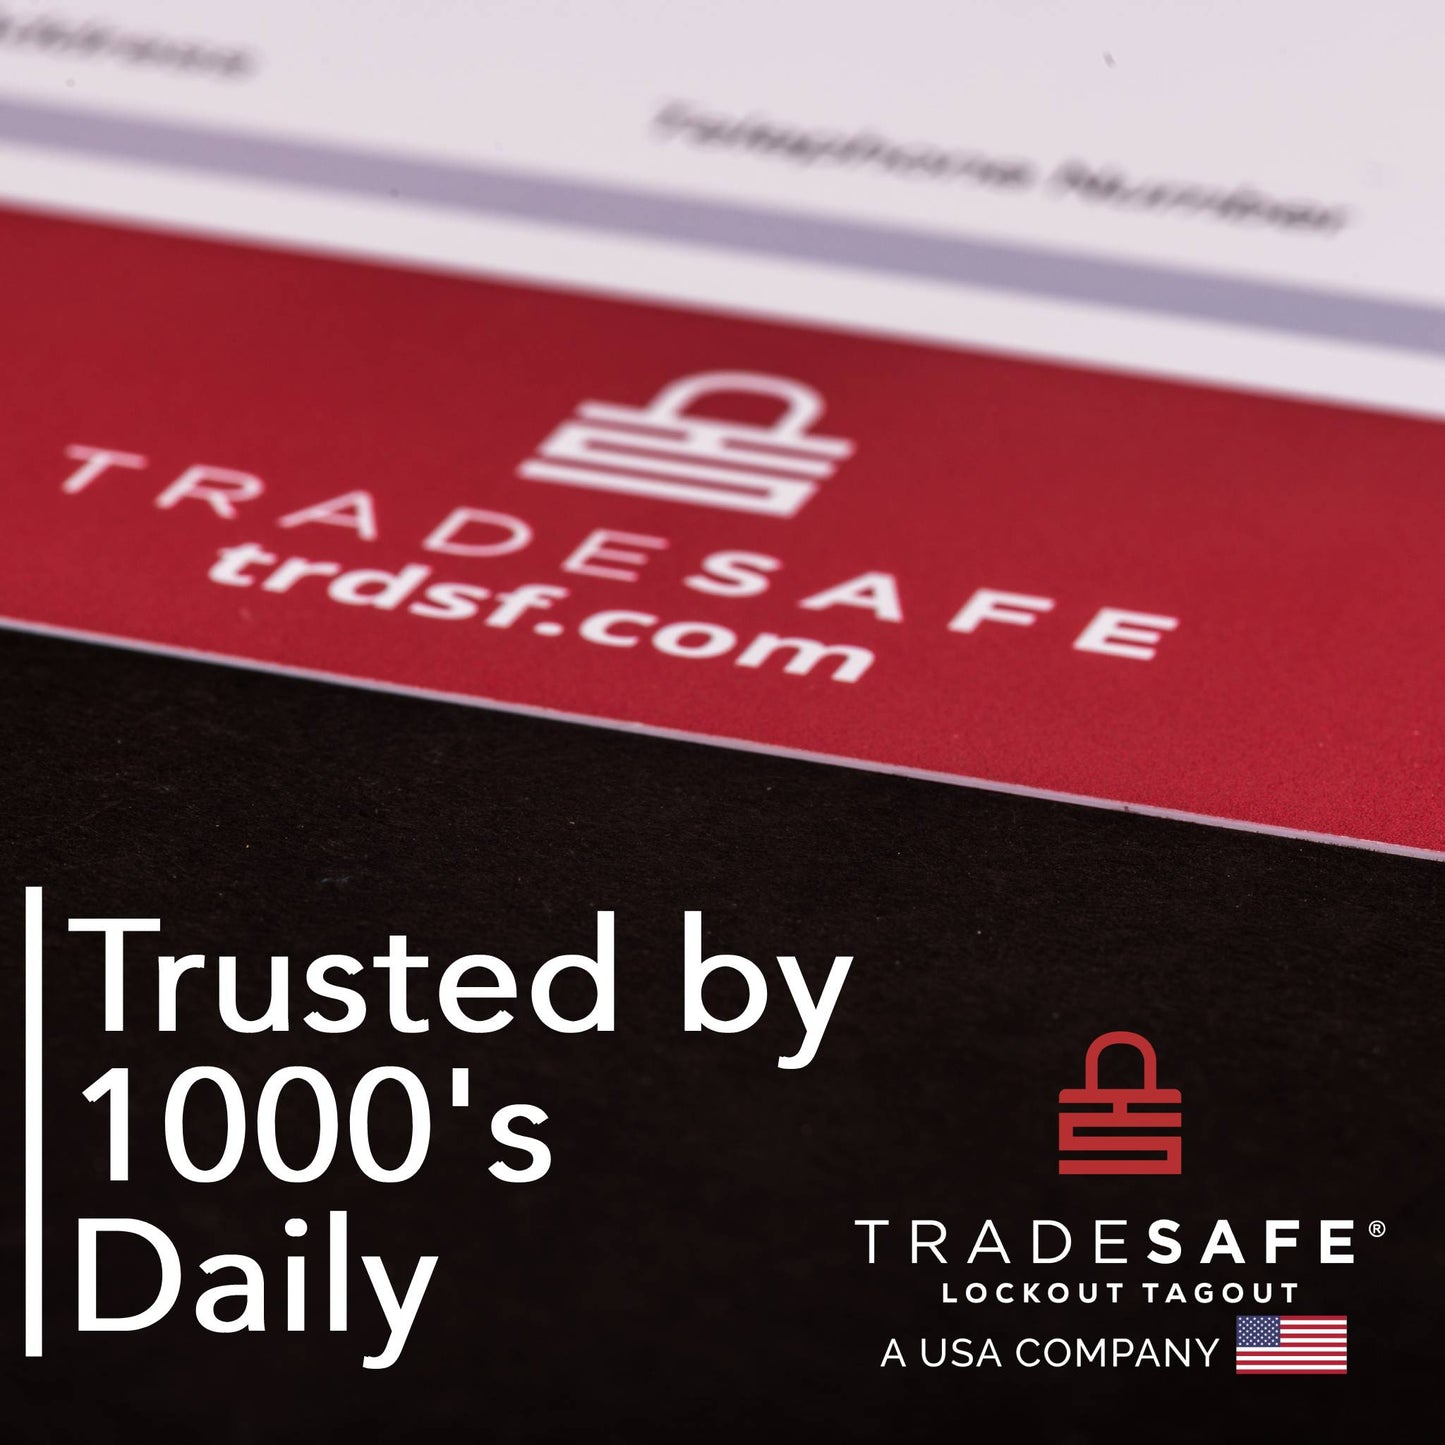 tradesafe osha ghs hazcom poster brand image with text; trusted by 1000s daily